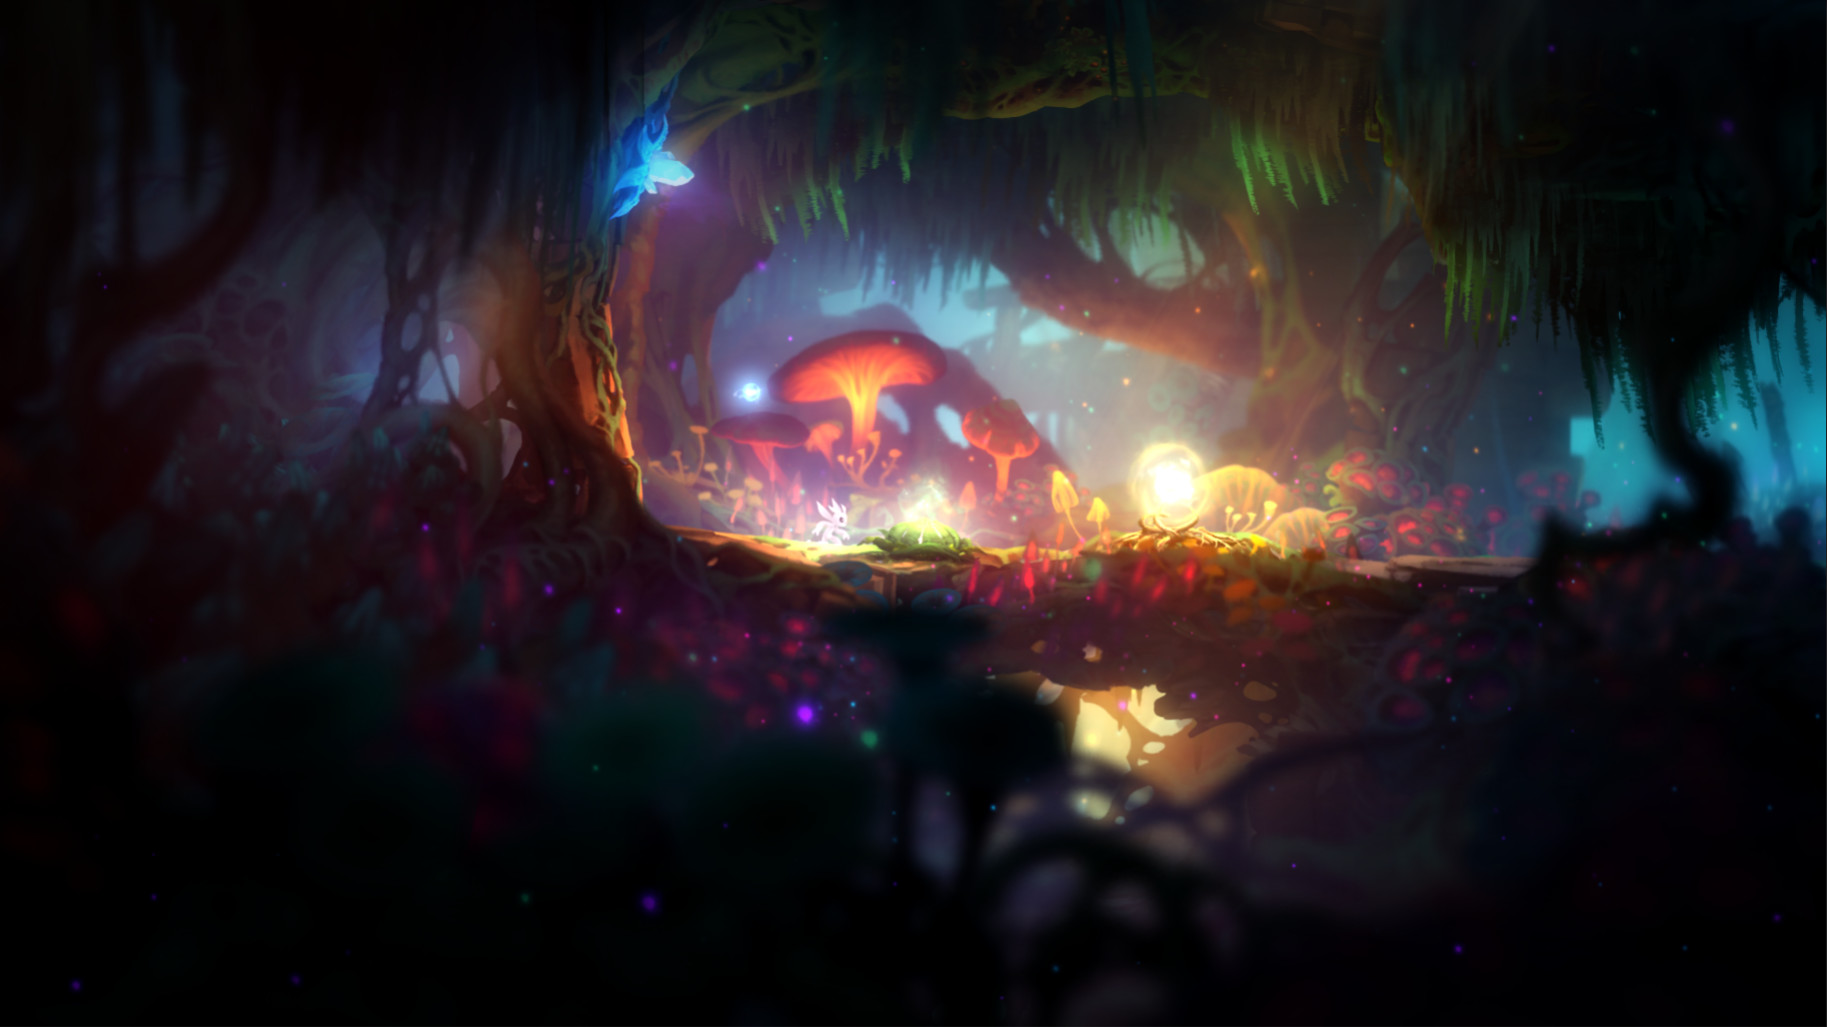 Ori and the Blind Forest: Definitive Edition